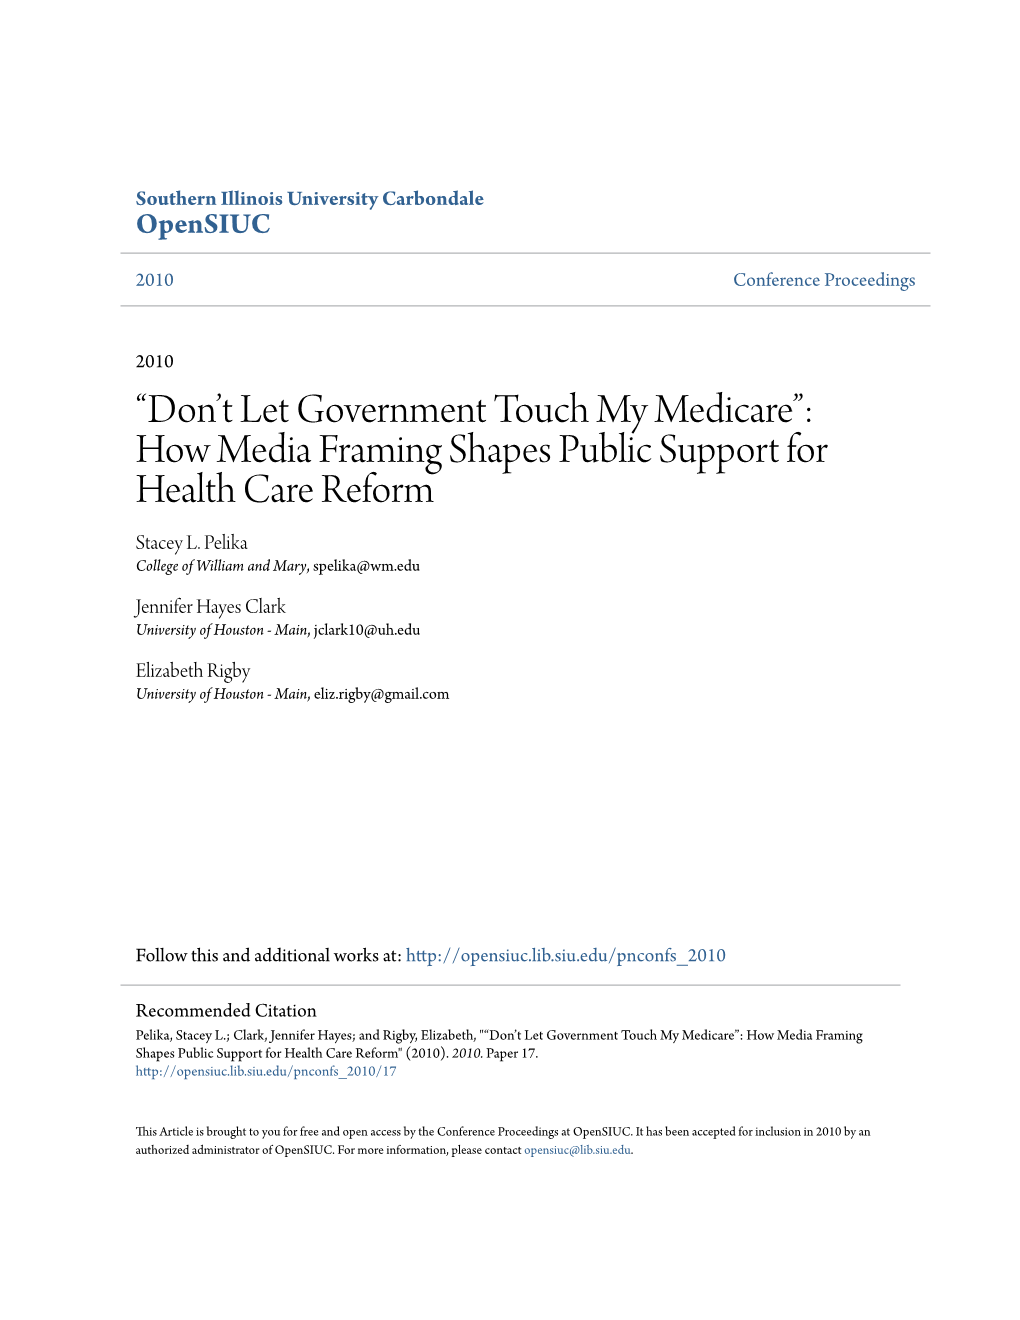 How Media Framing Shapes Public Support for Health Care Reform Stacey L